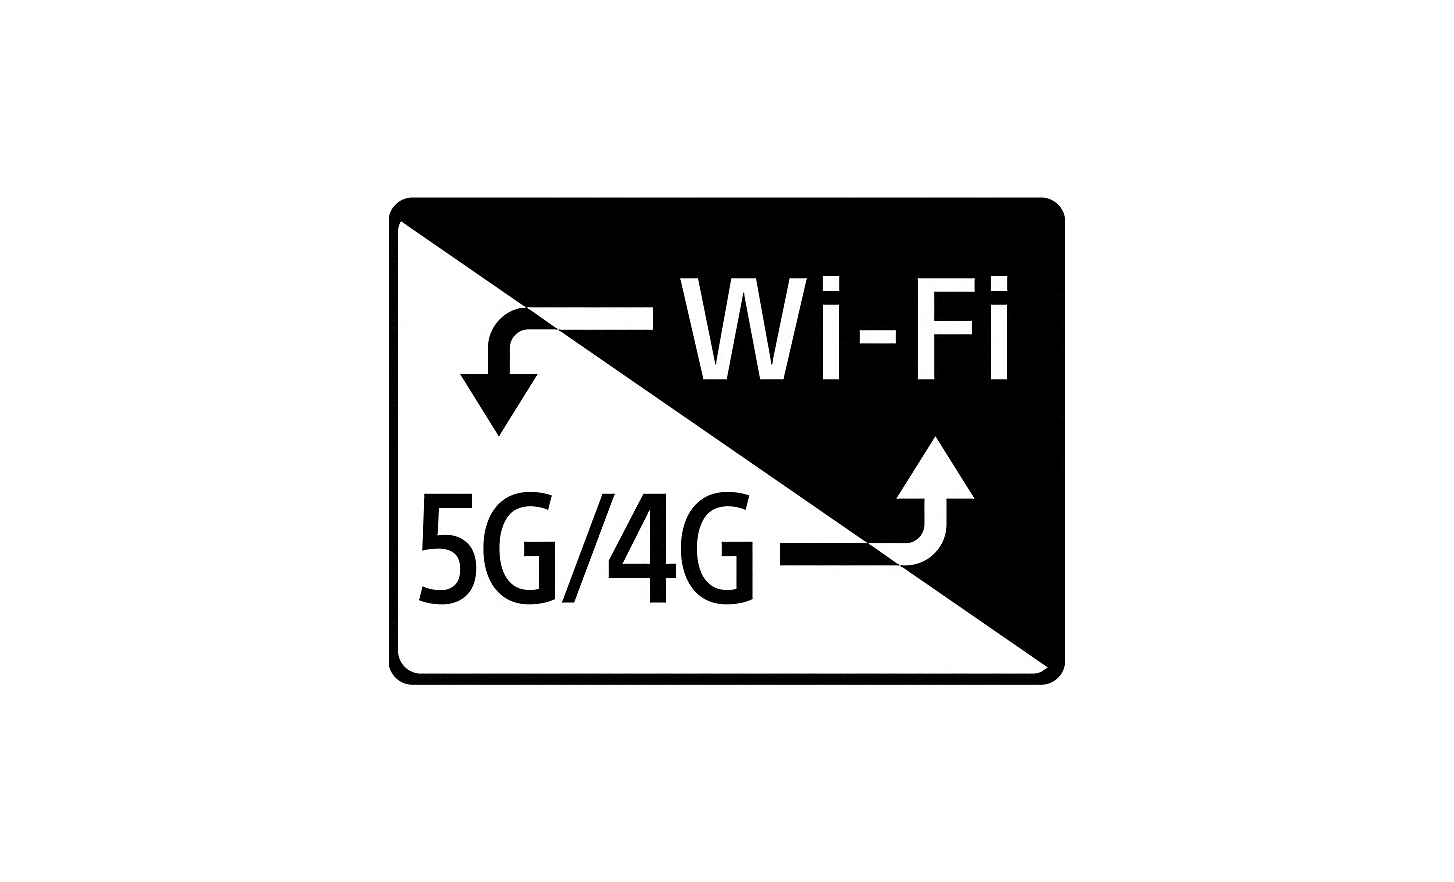 Logo for smart connectivity featuring 5G/4G and Wi-Fi